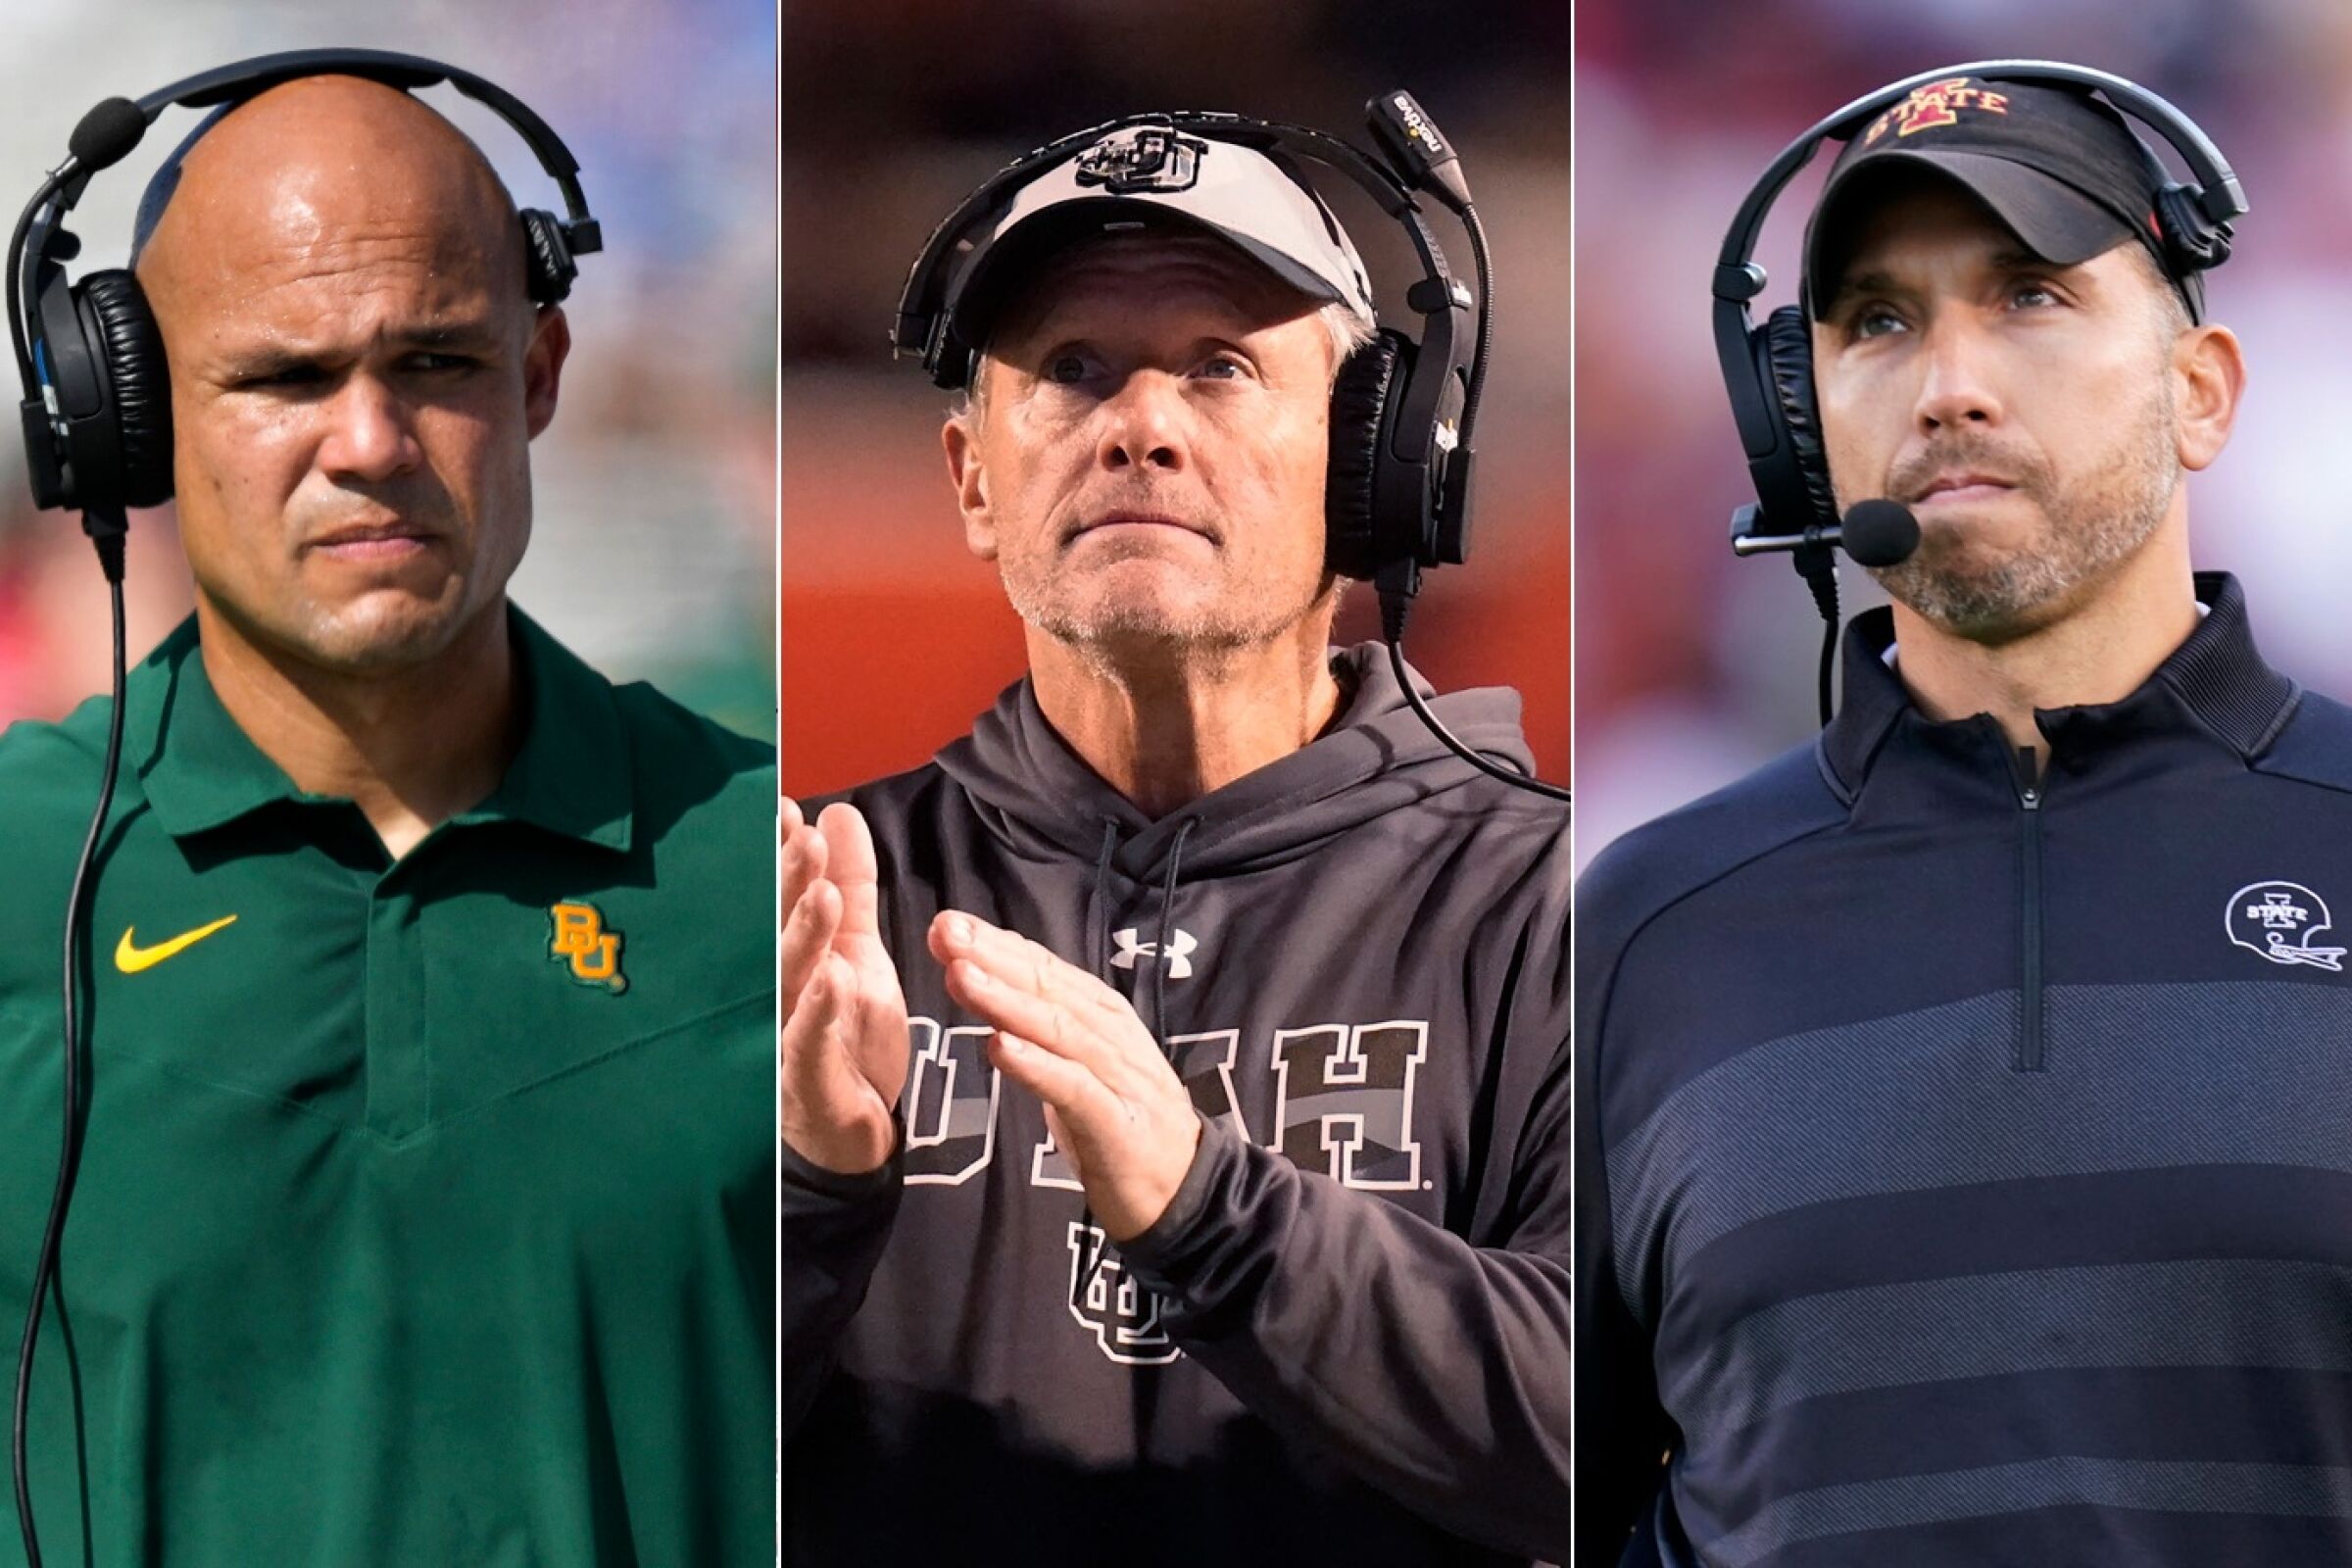 Potential USC head coach candidates include Baylor's Dave Aranda, Utah’s Kyle Whittingham and Iowa State’s Matt Campbell.